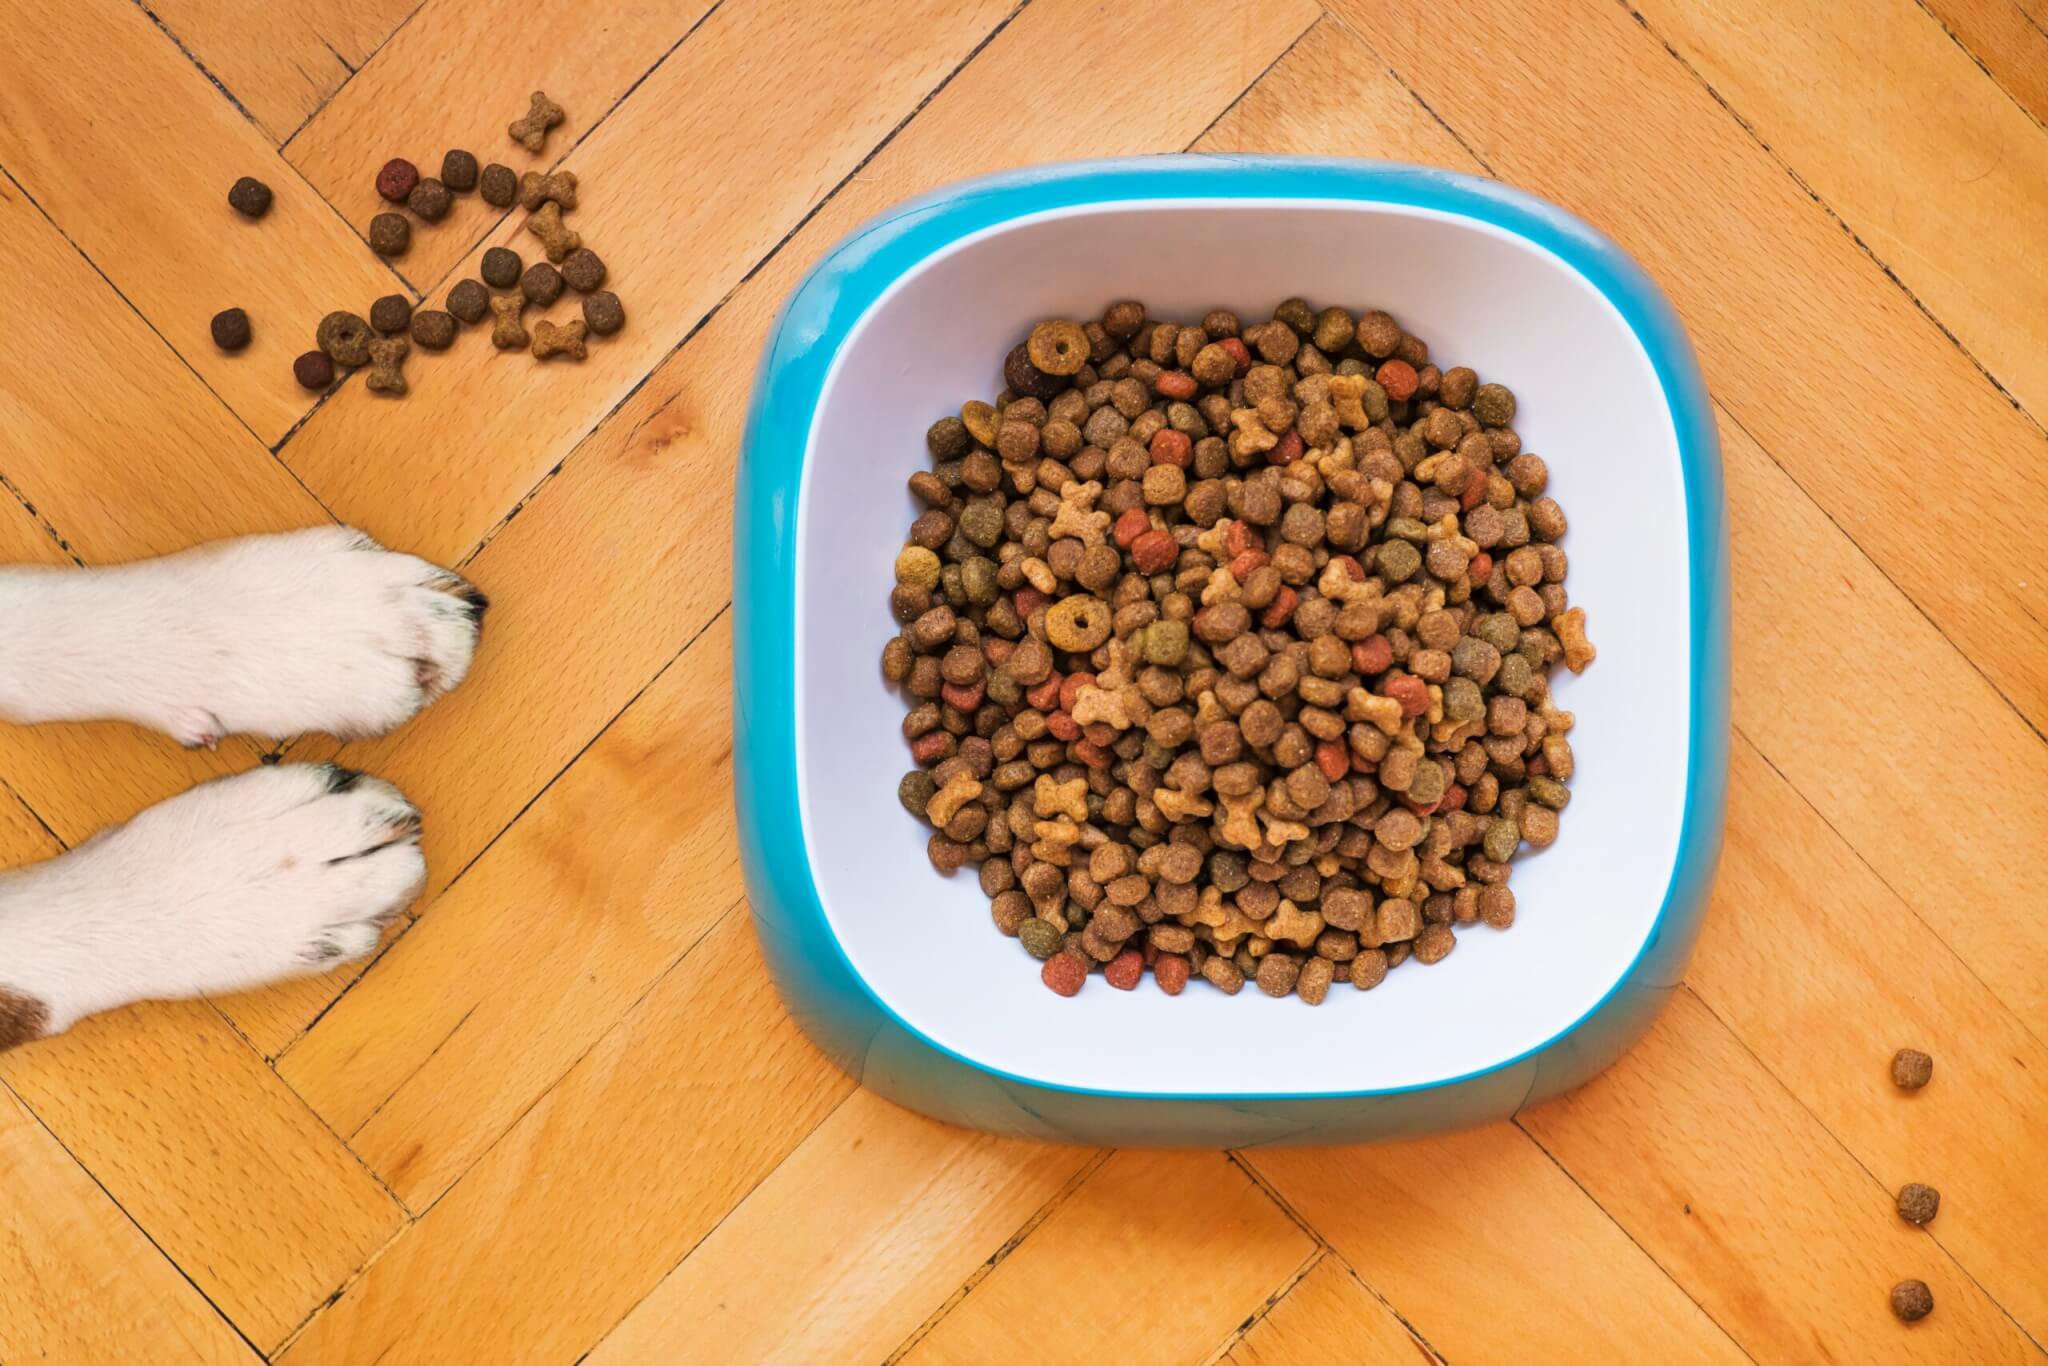 Best Dog Food In 2023: Top 5 Kibbles Most Recommended By Experts